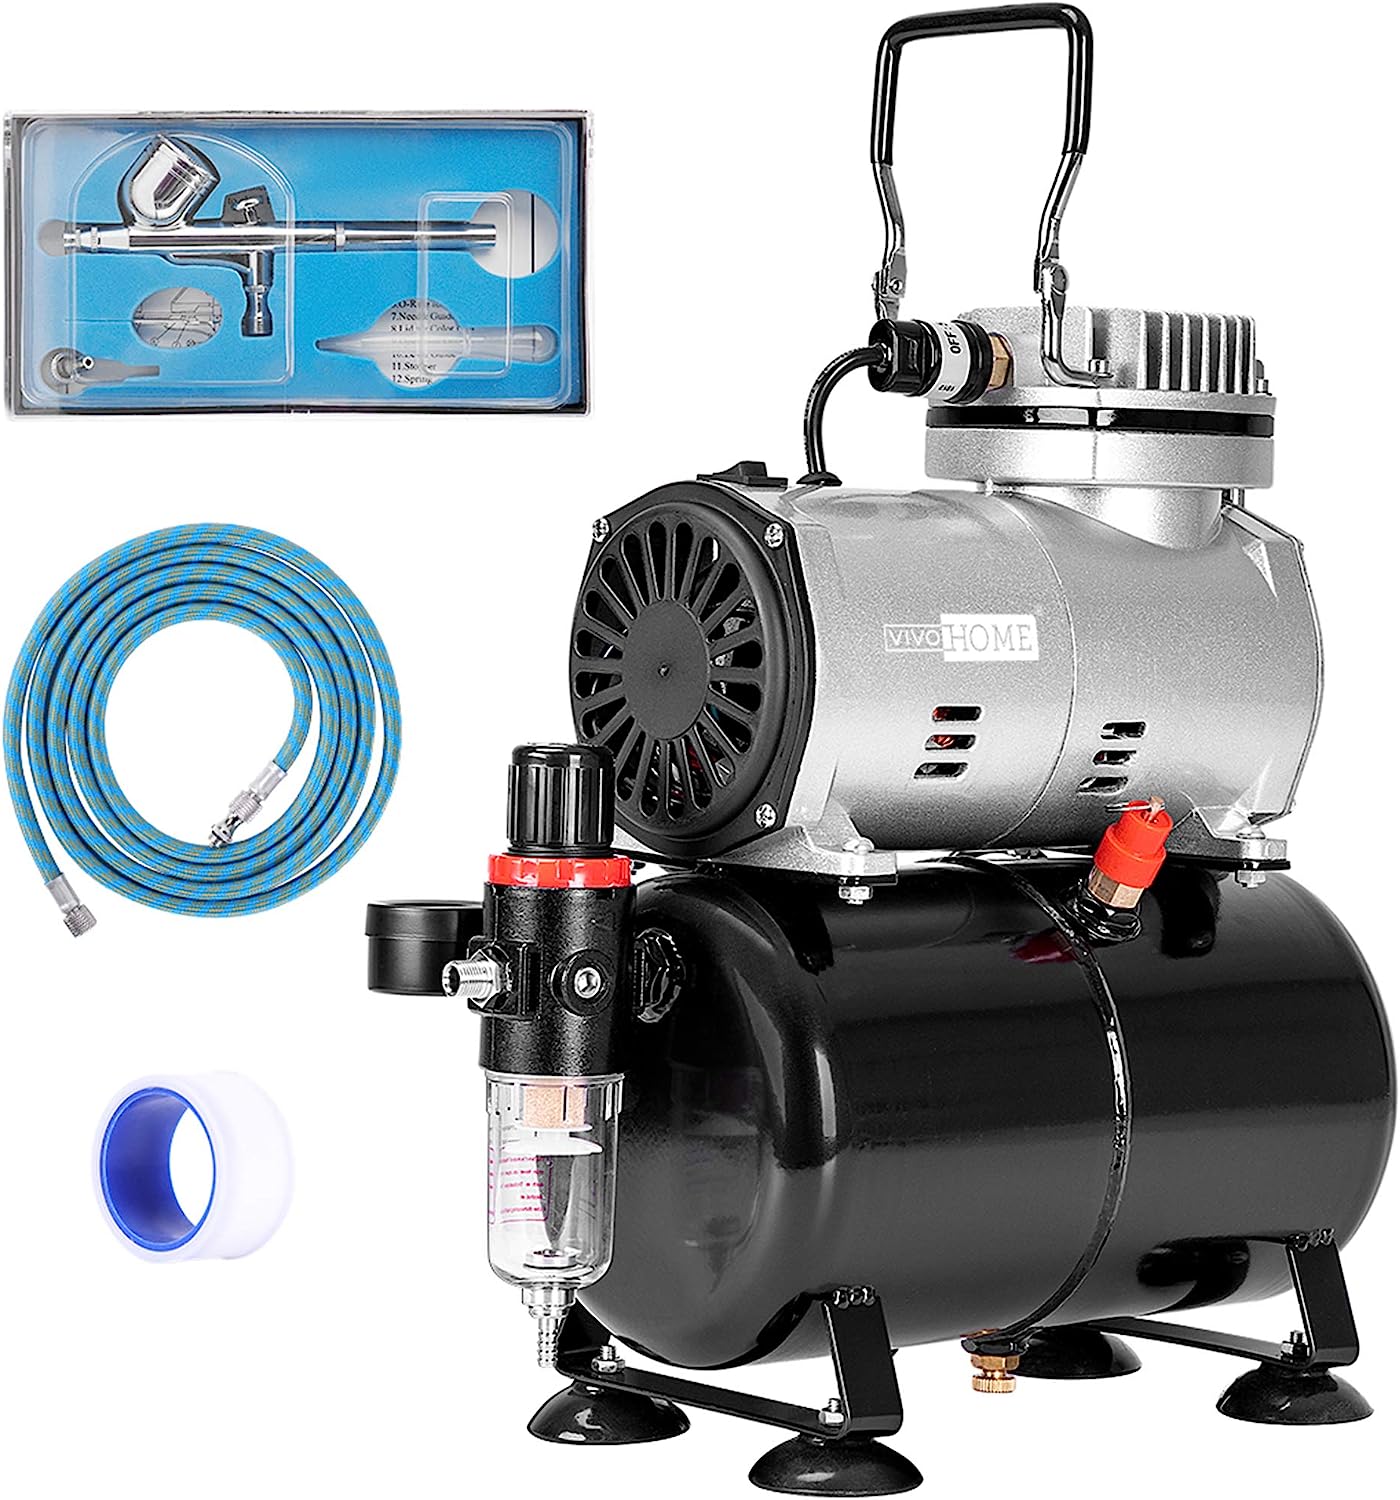 size compressor for spray painting product comparison